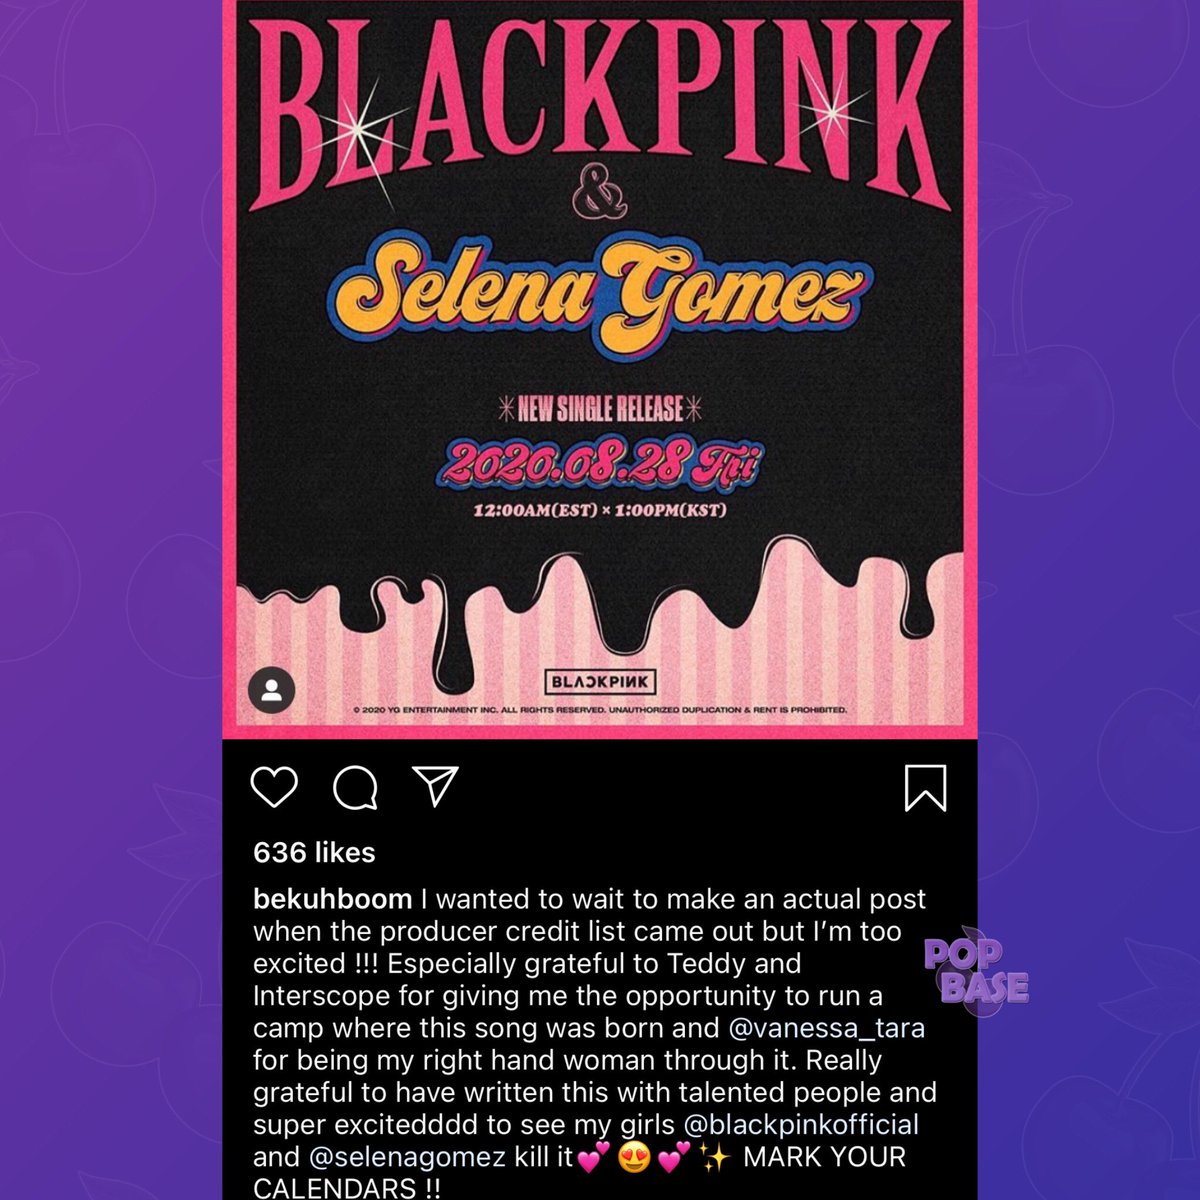 Bekuh Boom, co-writer of previous BLACKPINK hit singles like Boombayah, D4, and Whistle, shares excitement for upcoming SelPink collab via Instagram:

“Really grateful to have written this with talented people and super exciteddddd..”